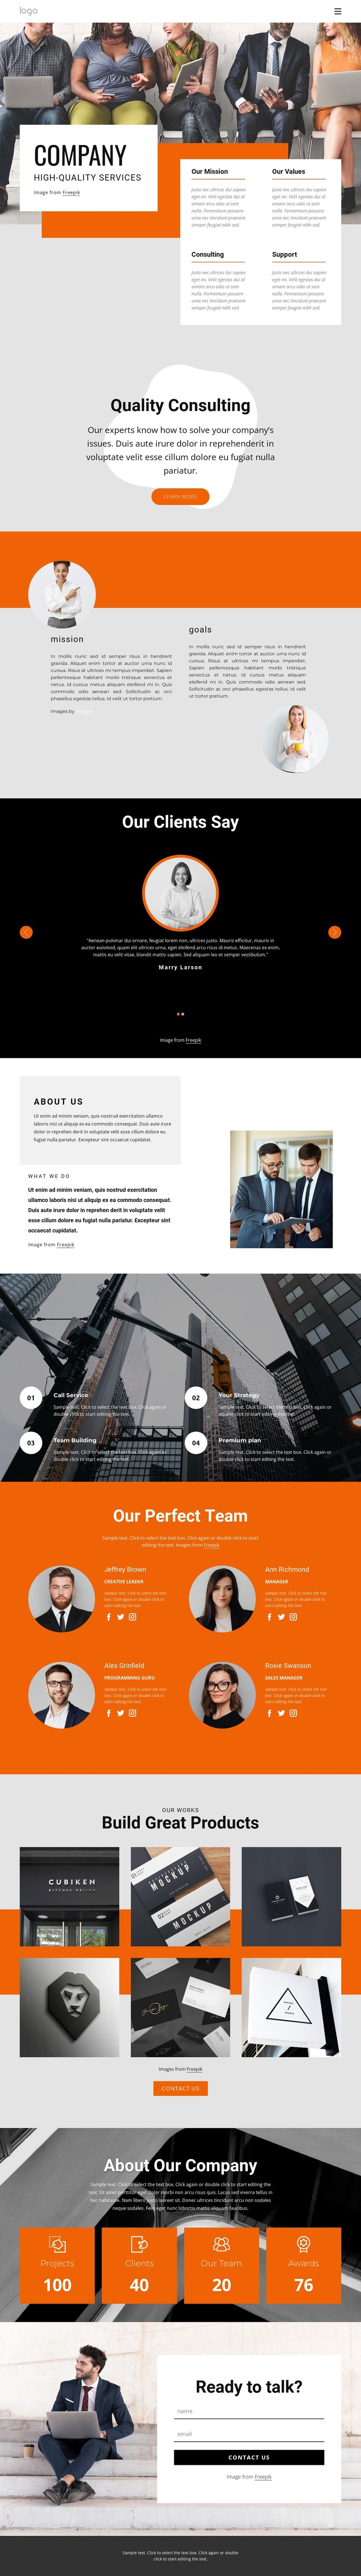 Hight quality consulting firm WordPress Theme